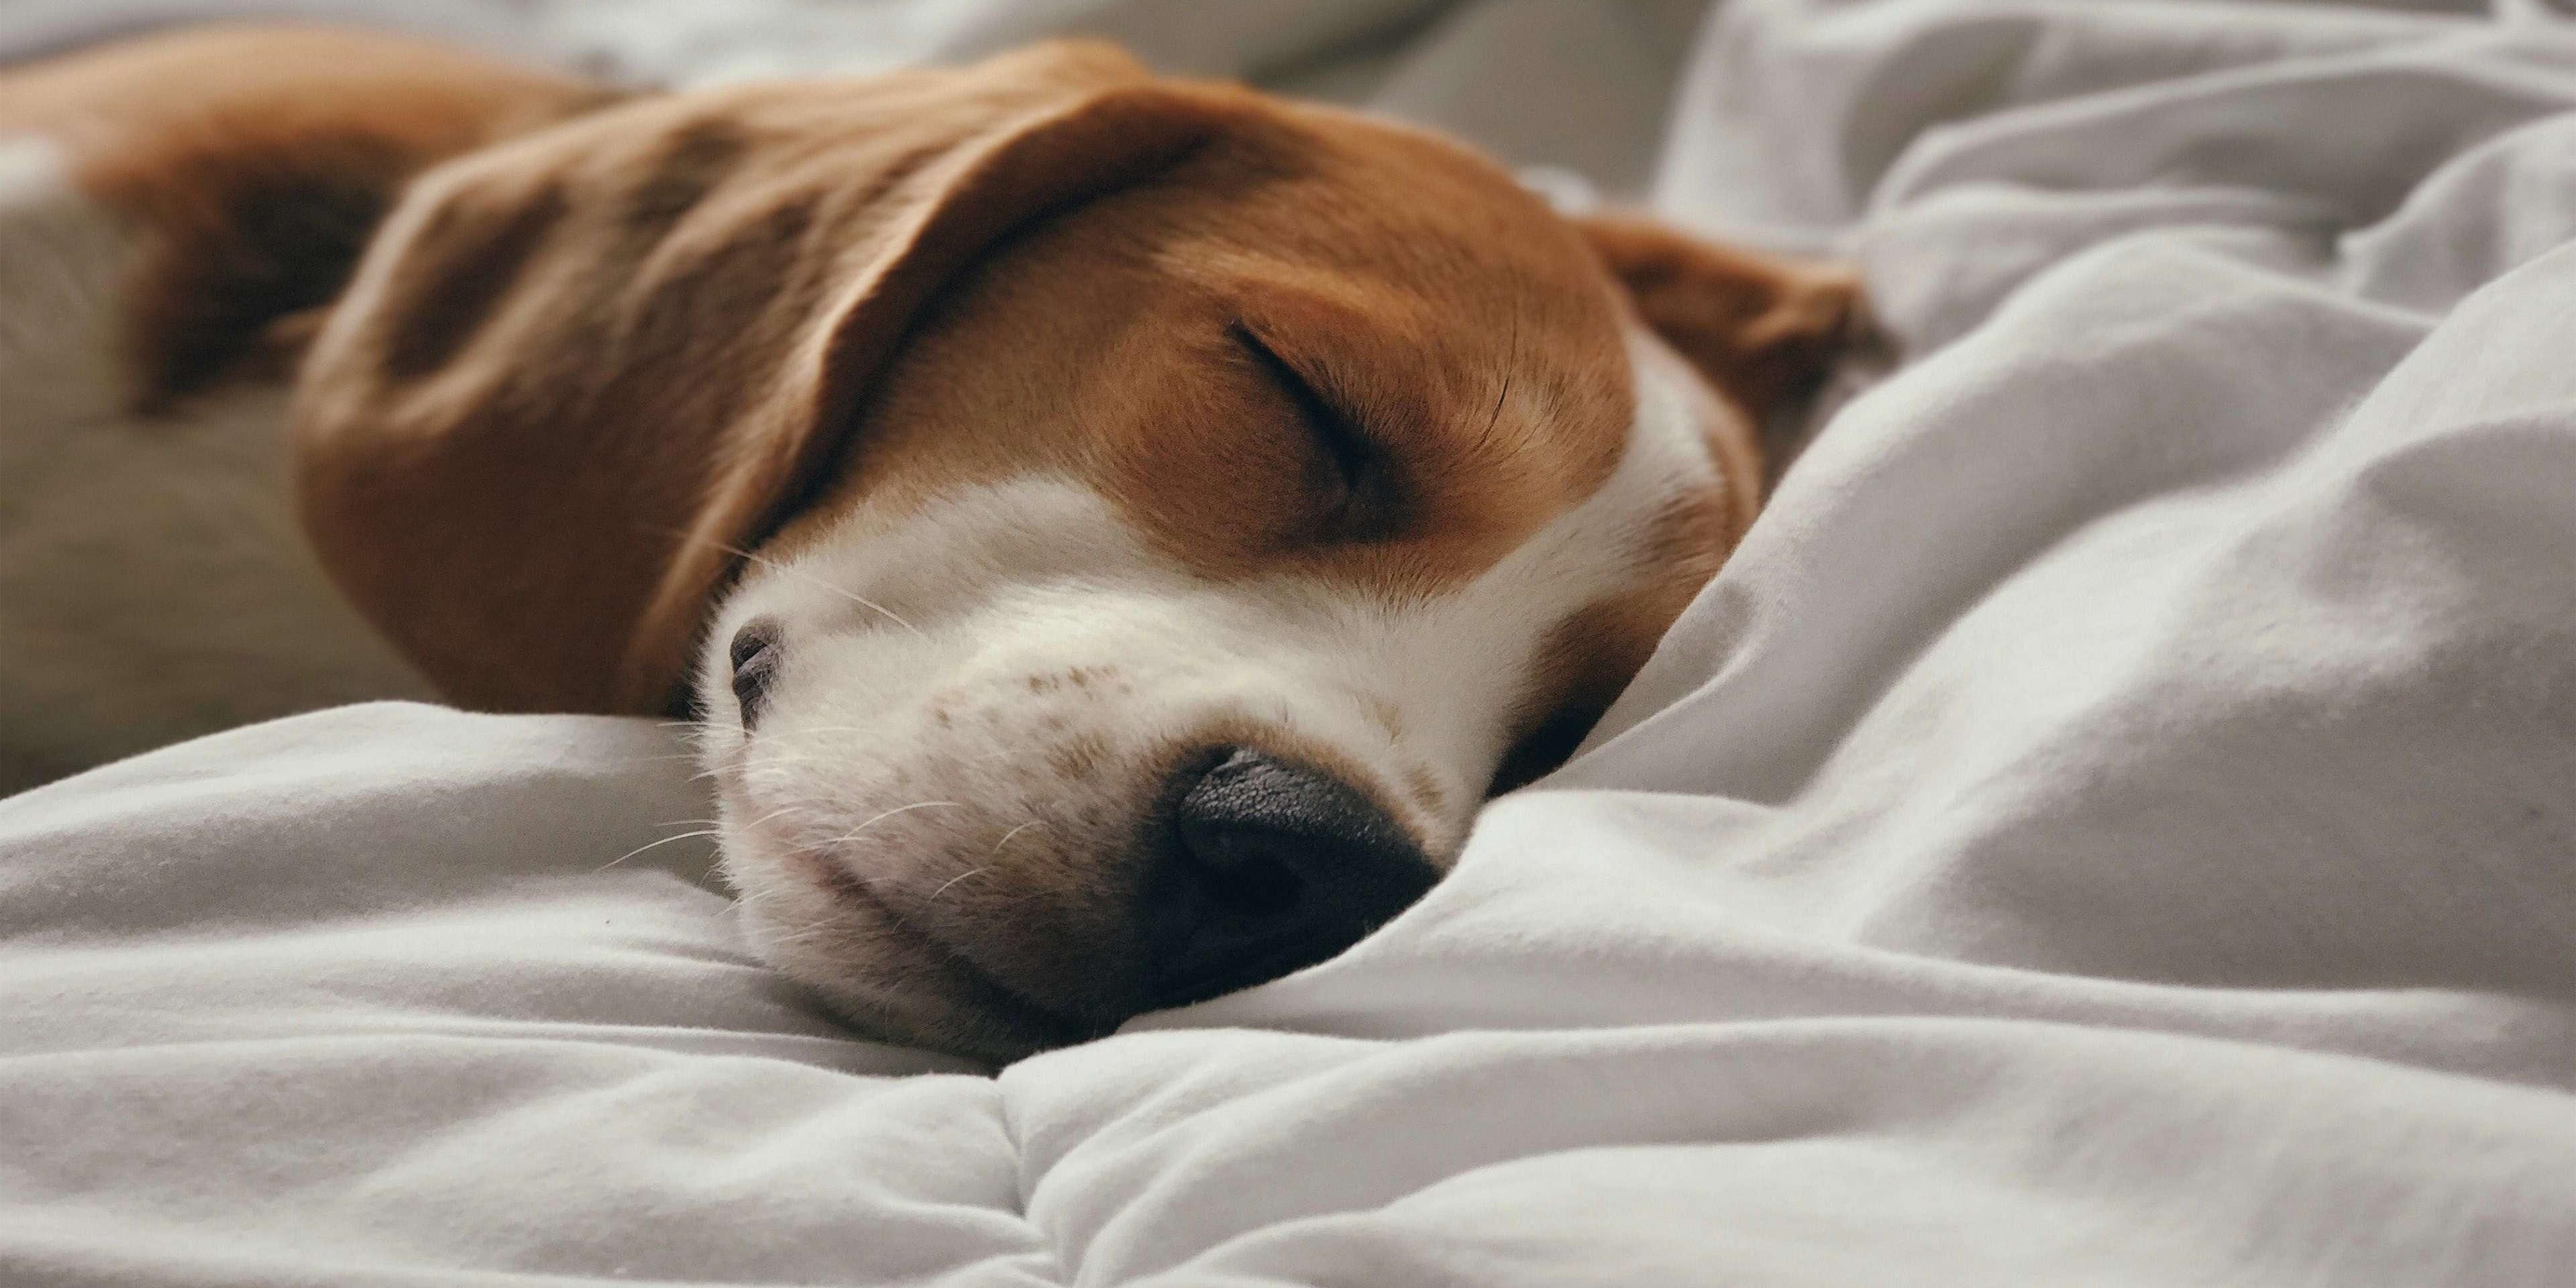 Traveling with your furry friends is always better!  Save on kennel charges by brining them along. Pet Fee is a non-refundable deposit of $75 per stay.  Check for our Pet Package for pet fee savings when booking ahead of time.